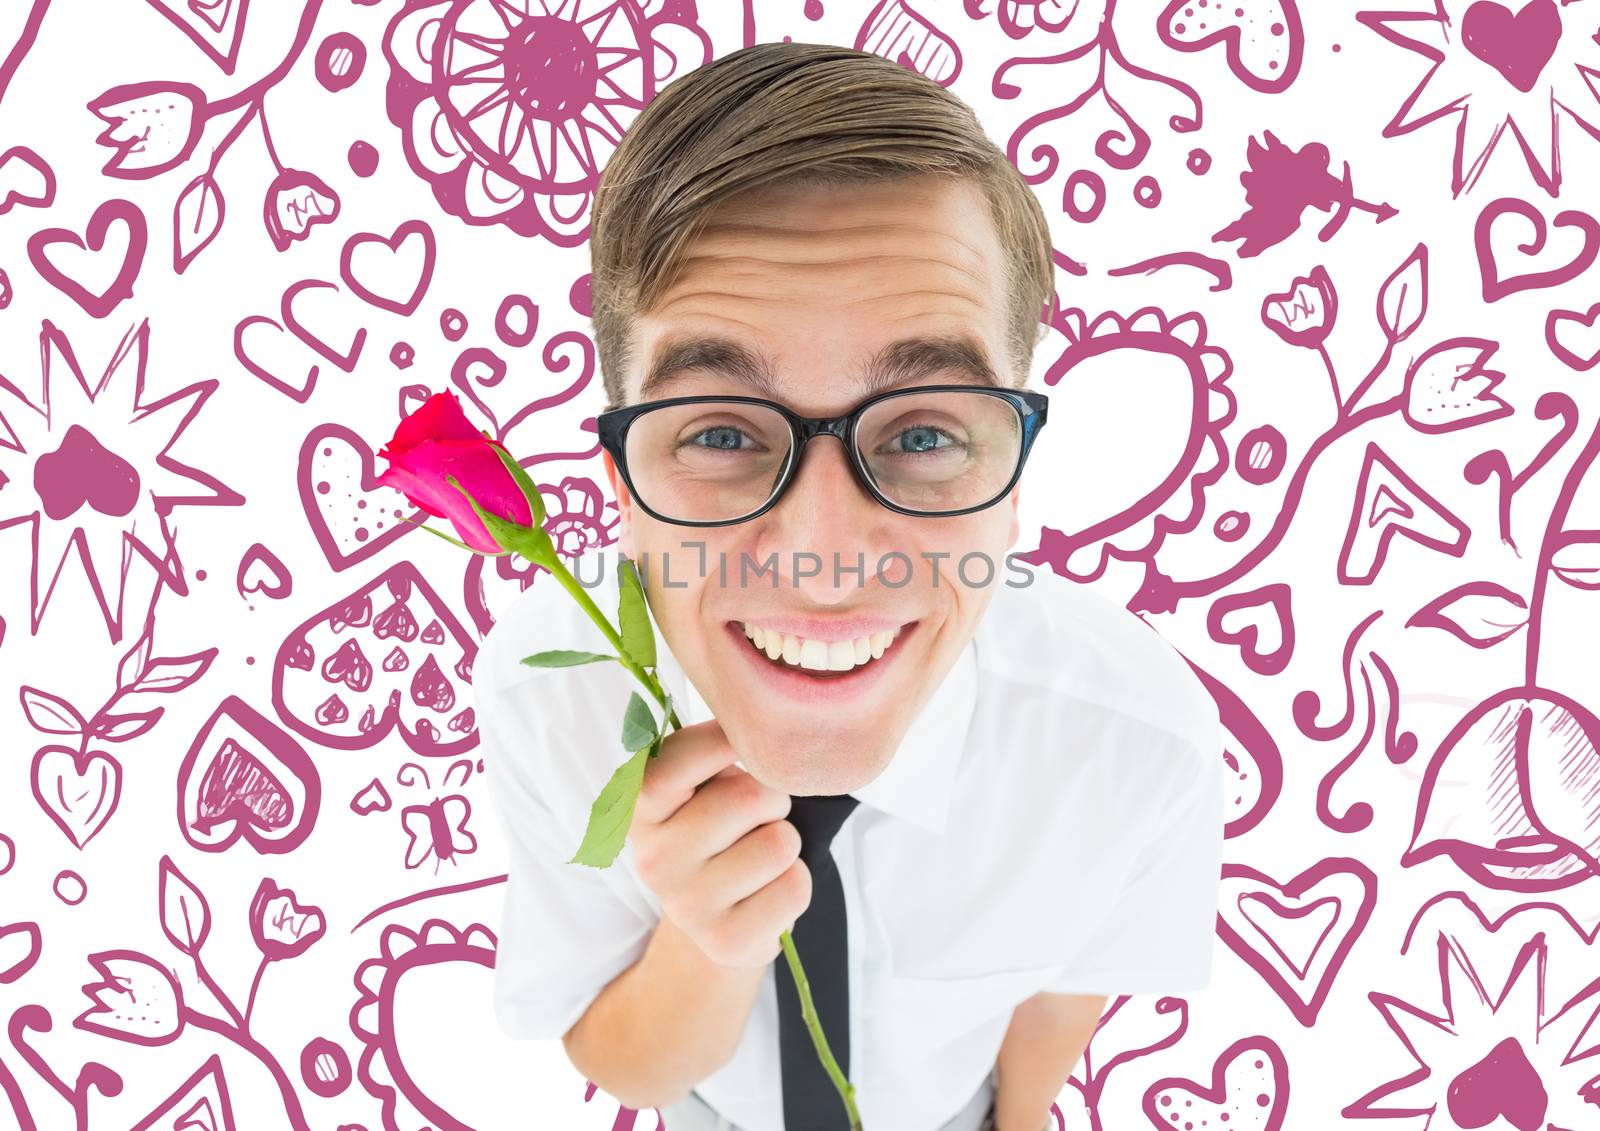 Romantic geeky hipster against valentines pattern